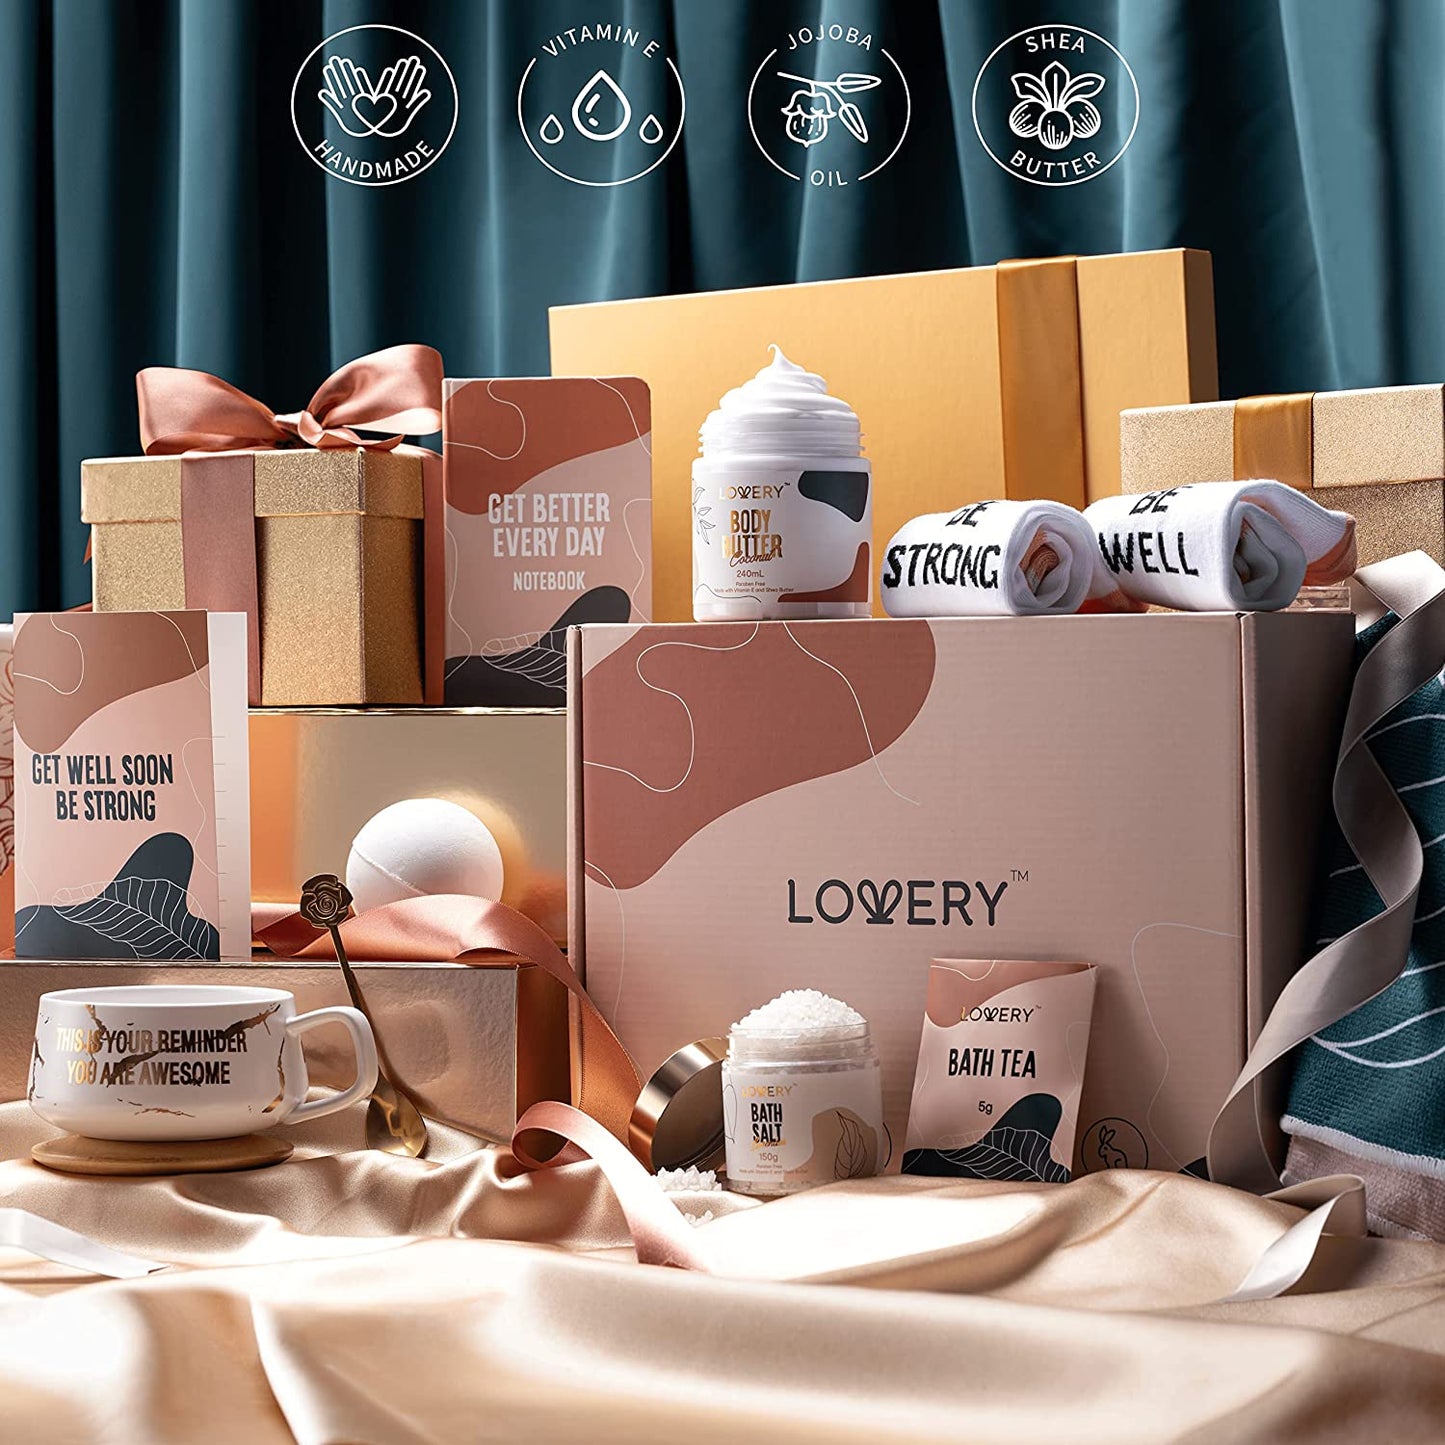 Get Well Soon Box, Luxurious Gift Baskets, Lovery Gift Box, Lovery Gift Baskets, Spa Treatment, Home Spa Treatment, Essential Oils, Aromatherapy Spa Treatment, Gift Boxes, Surprise Boxes